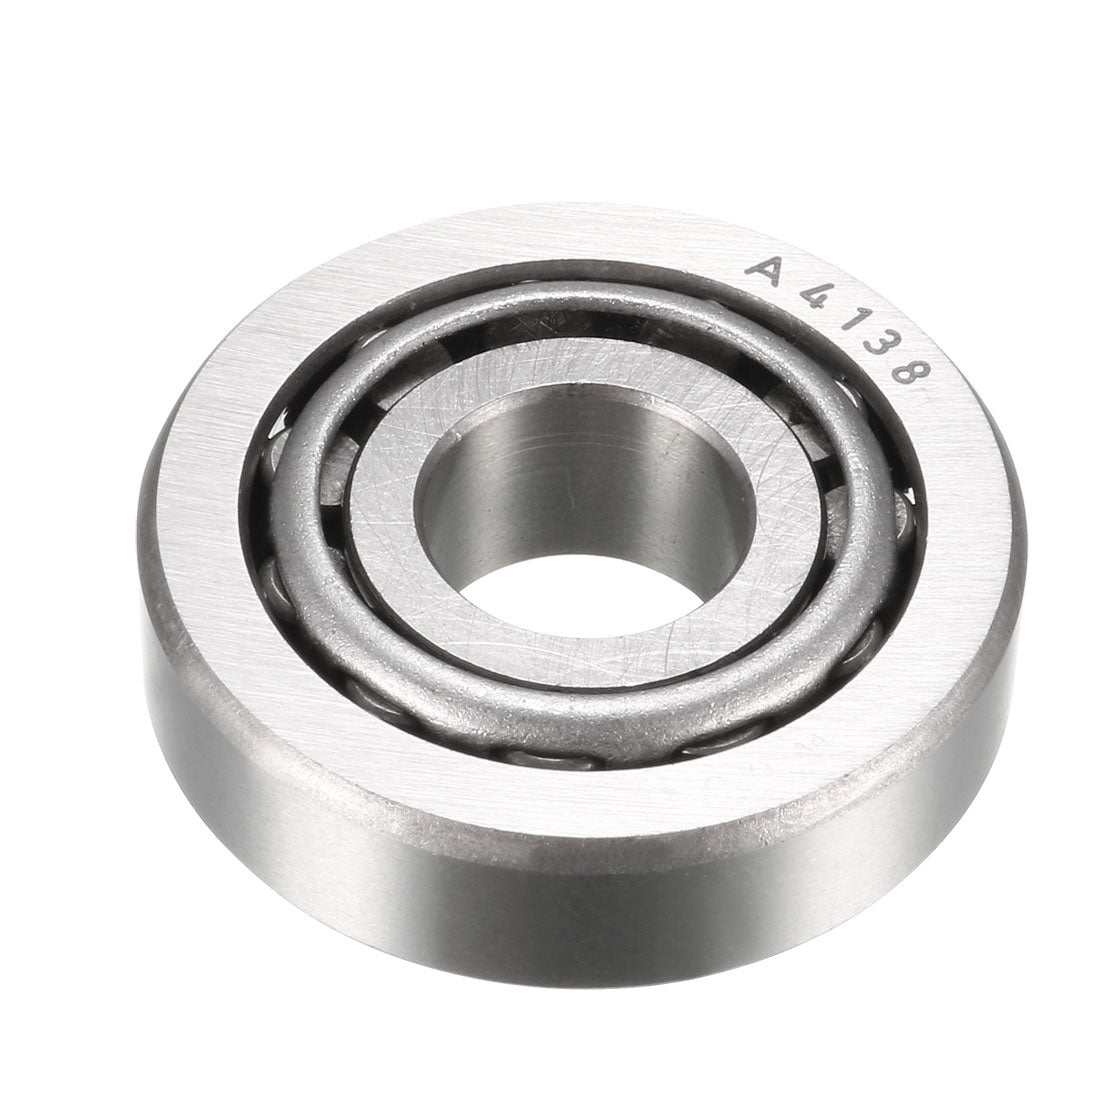 Uxcell Uxcell A2047/A2126 Tapered Roller Bearing Cone and Cup Set 0.4719" Bore 1.2595" O.D.